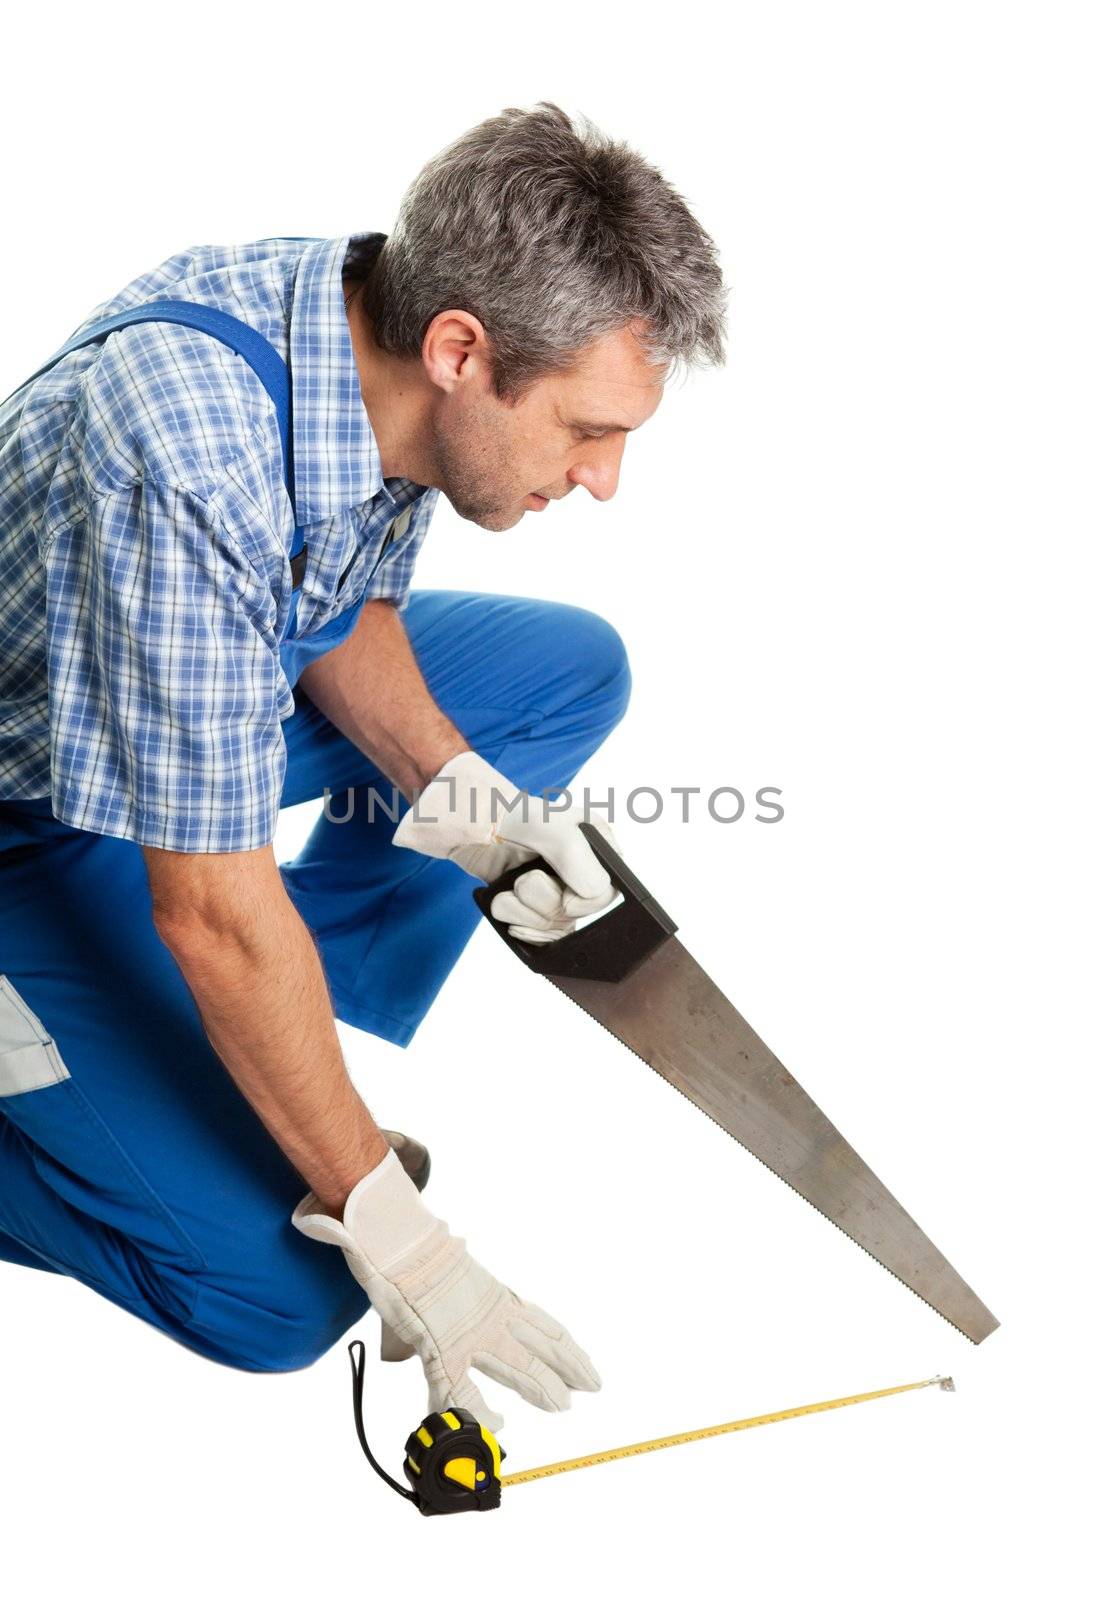 Confident service man cutting wit saw. Isolated on white